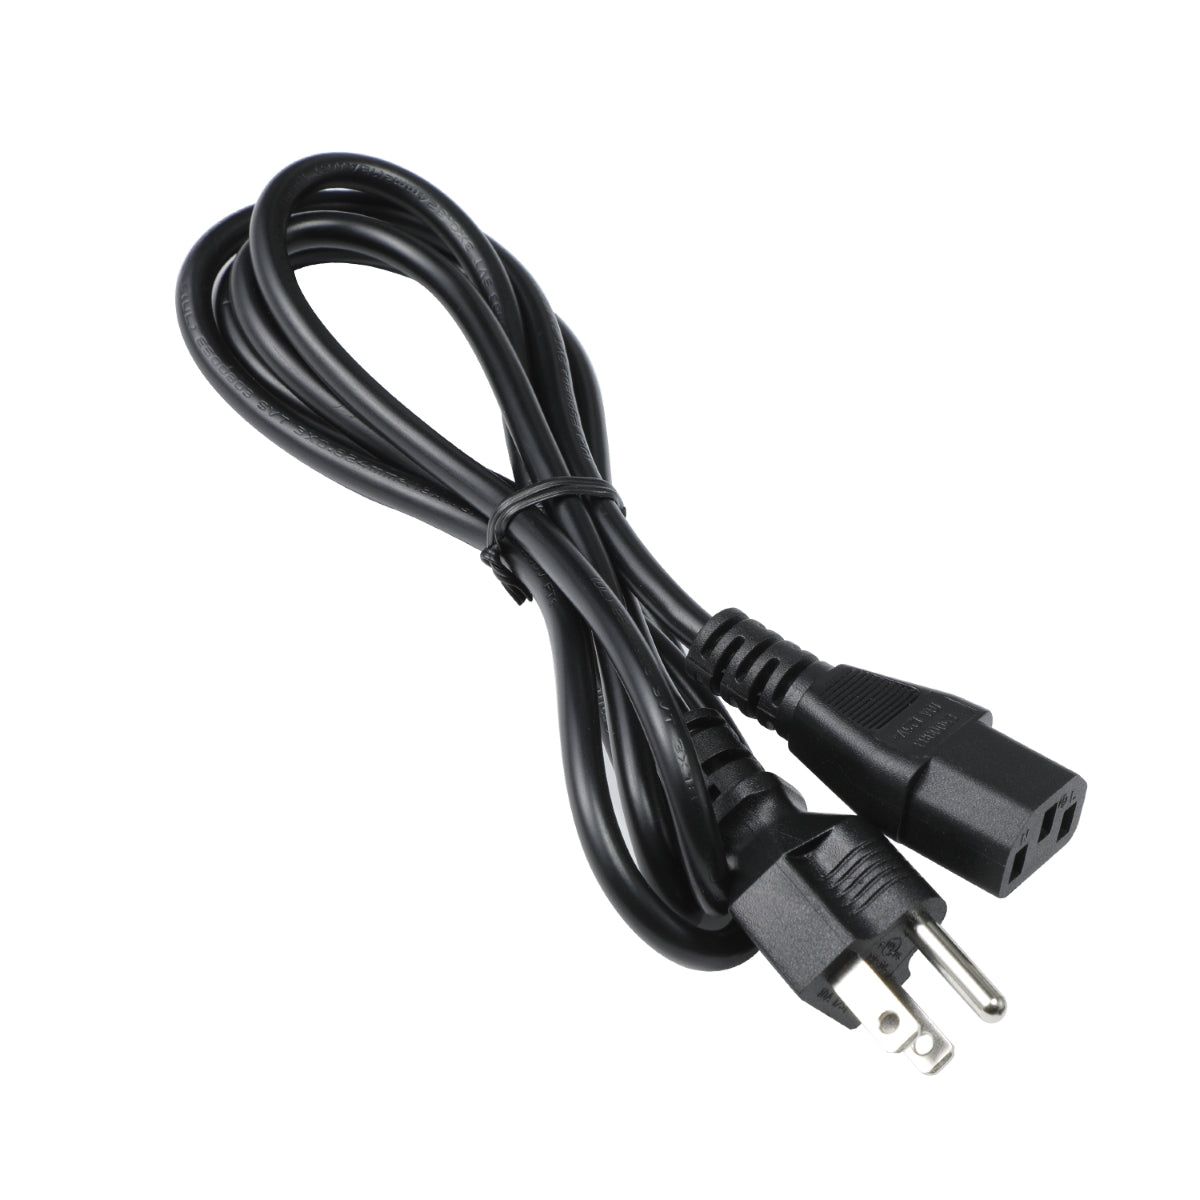 Power Cord for ASUS PA278QV ProArt Display